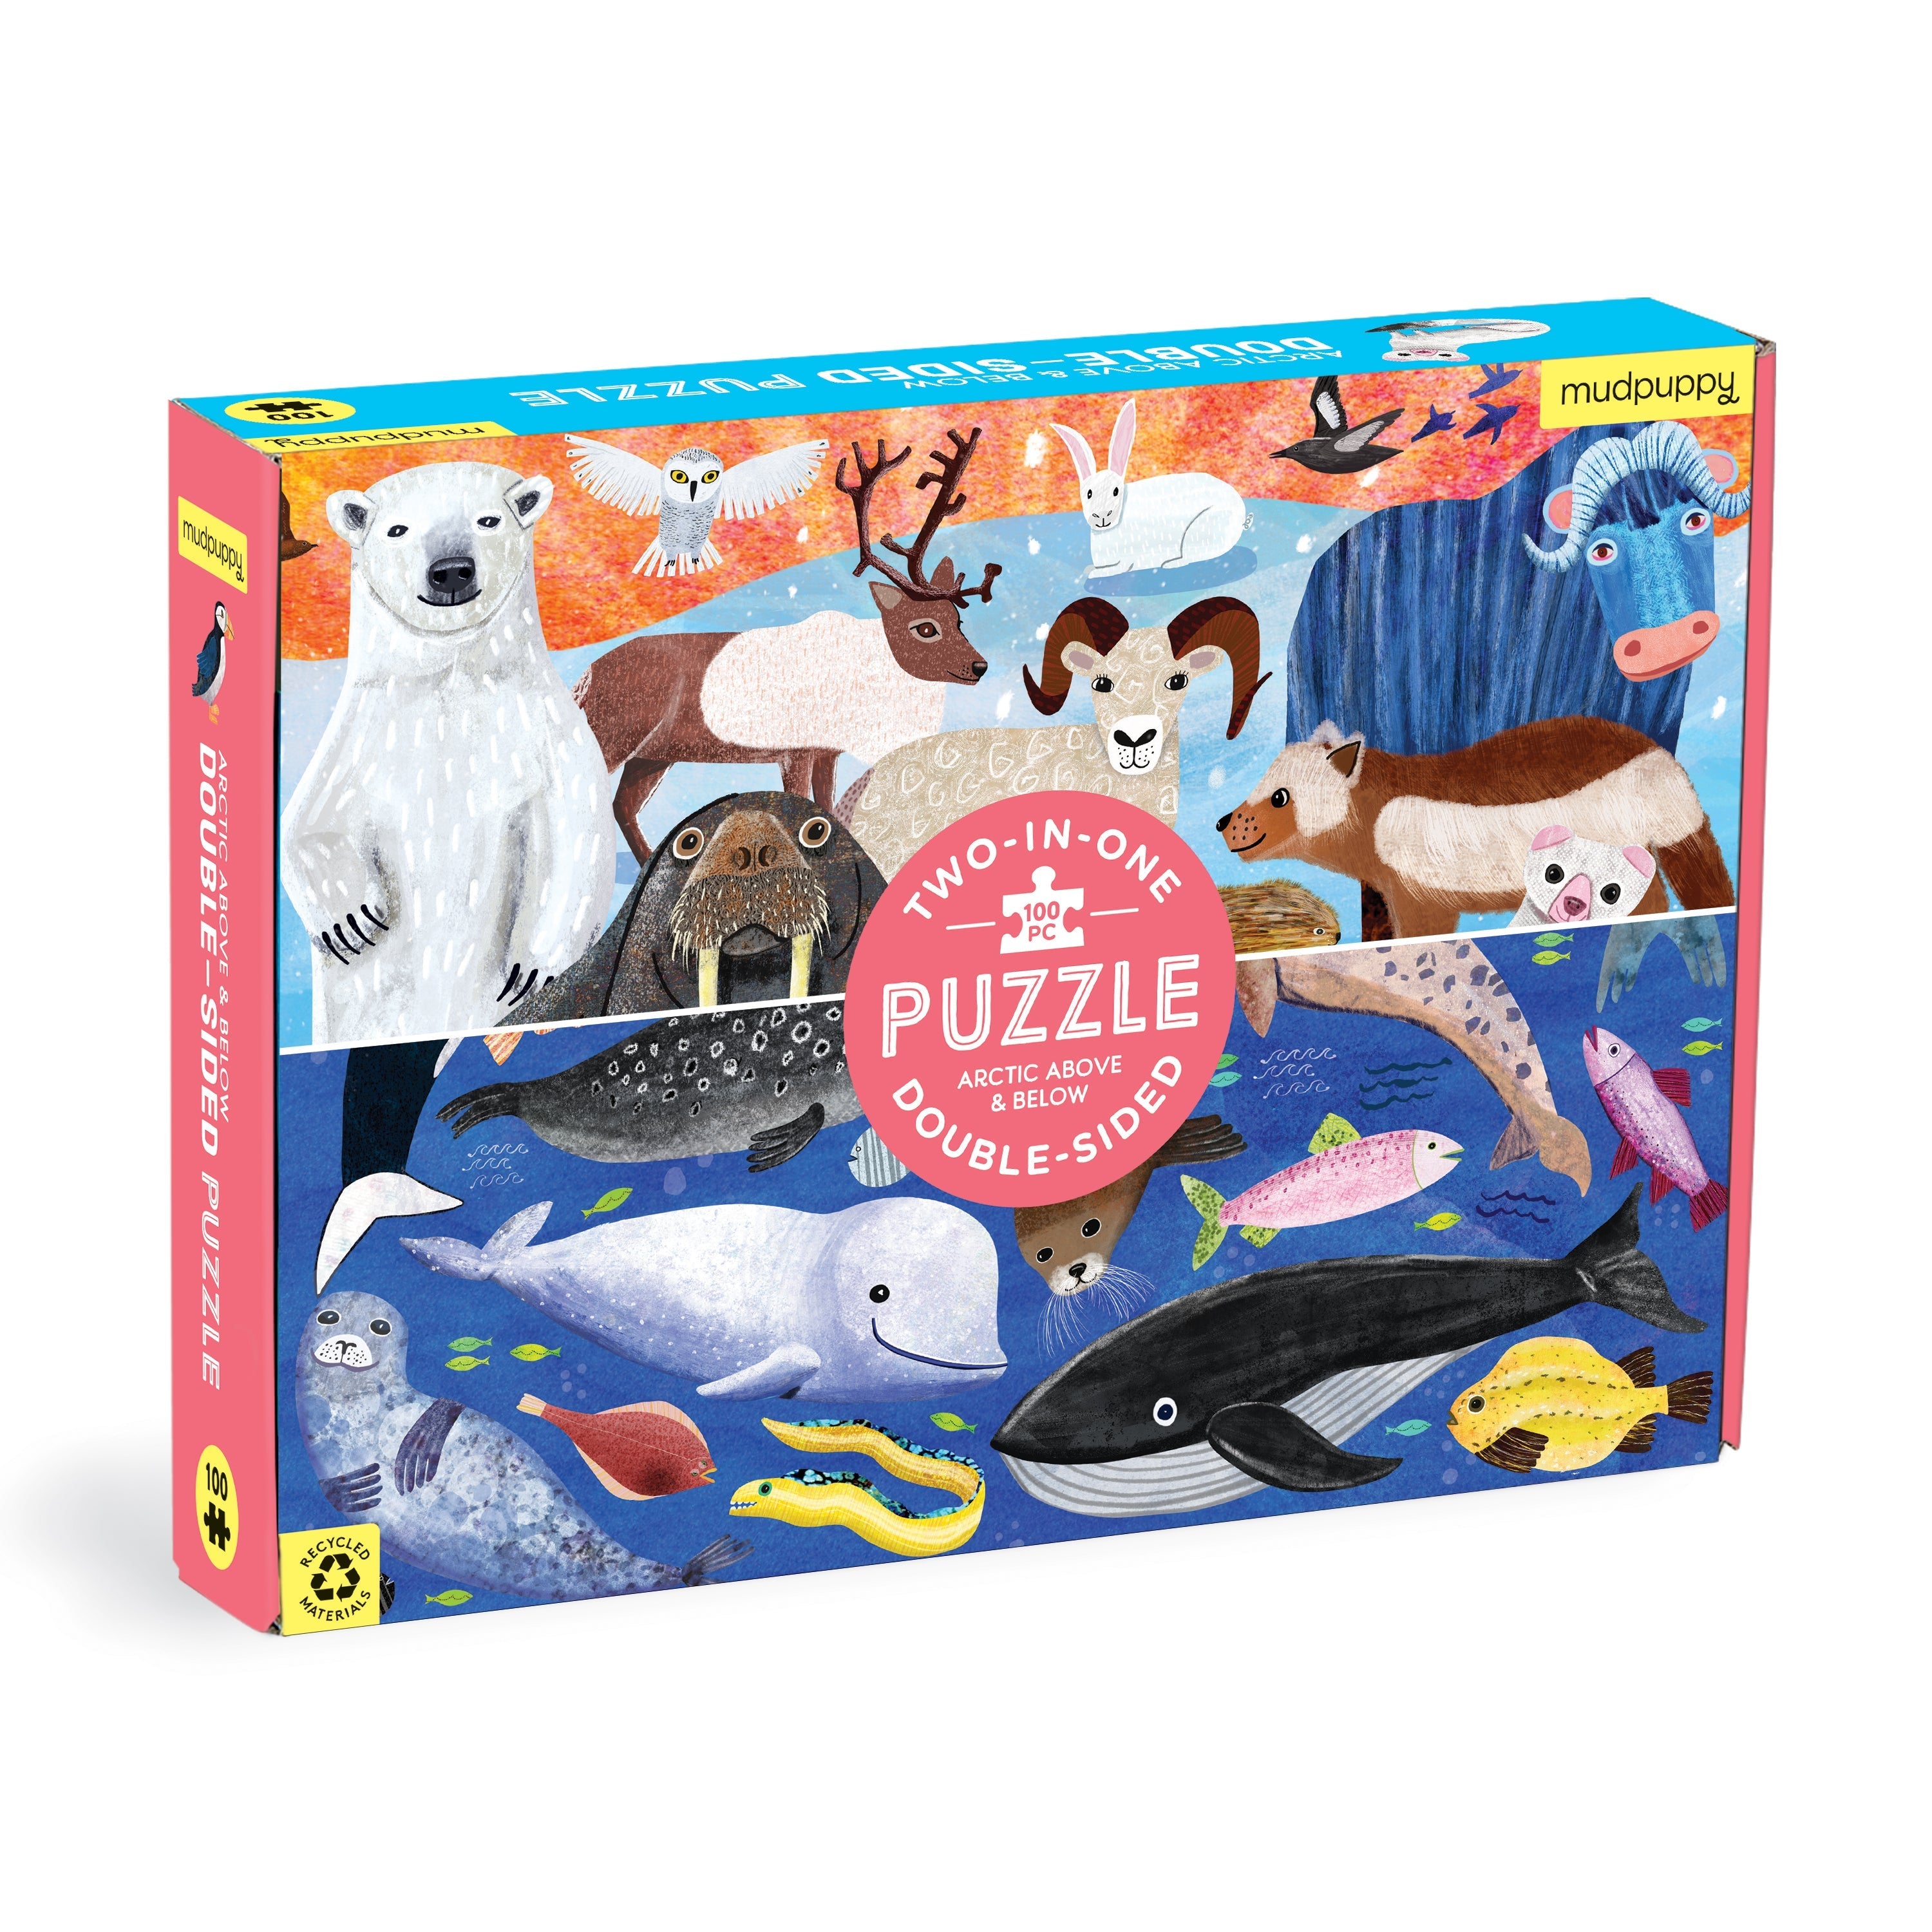 Arctic Above & Below 100 Piece Double Sided Mudpuppy Puzzle